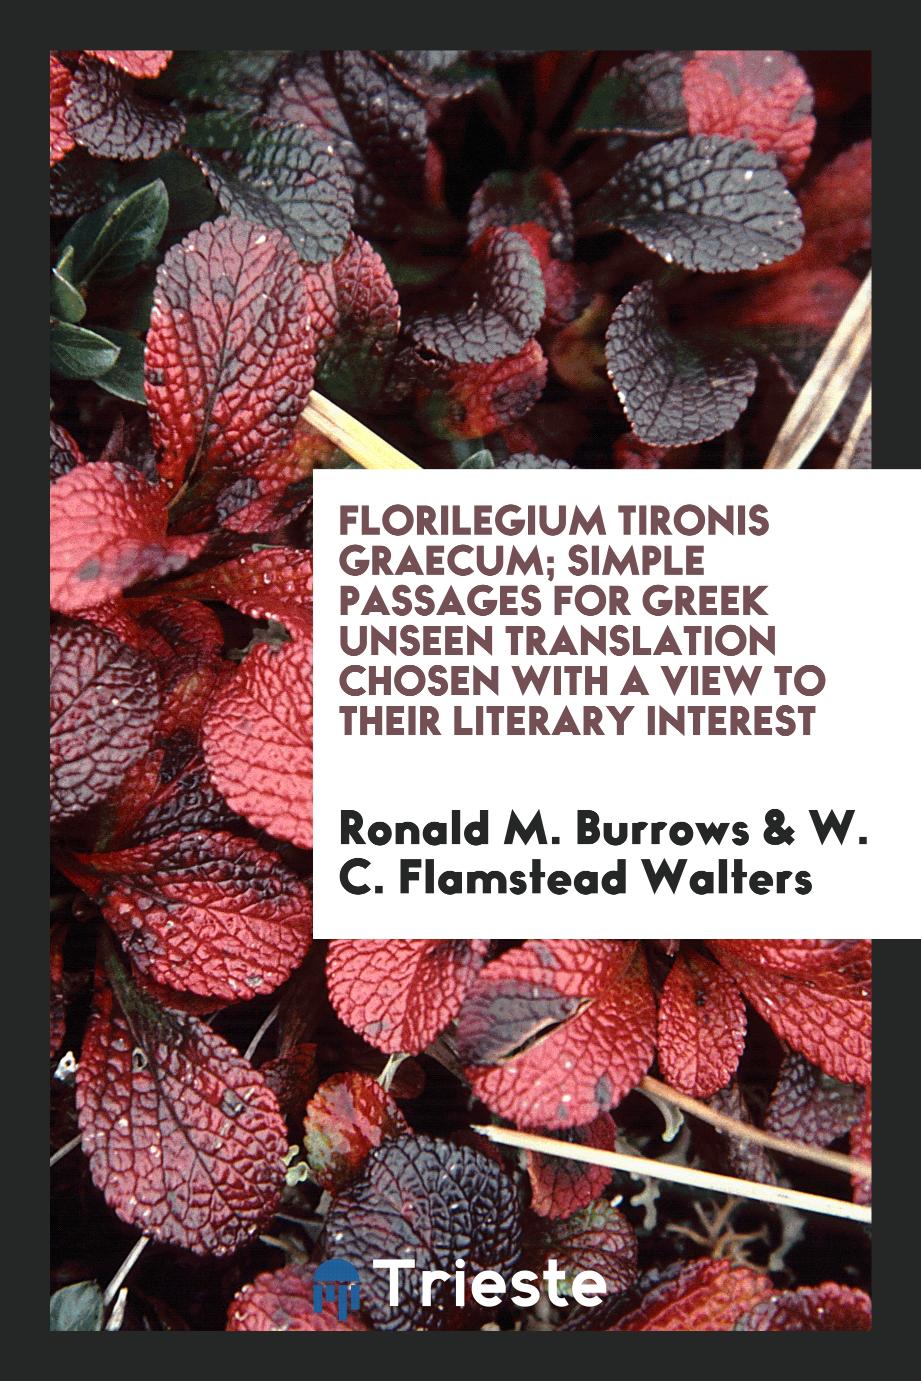 Florilegium tironis graecum; simple passages for Greek unseen translation chosen with a view to their literary interest